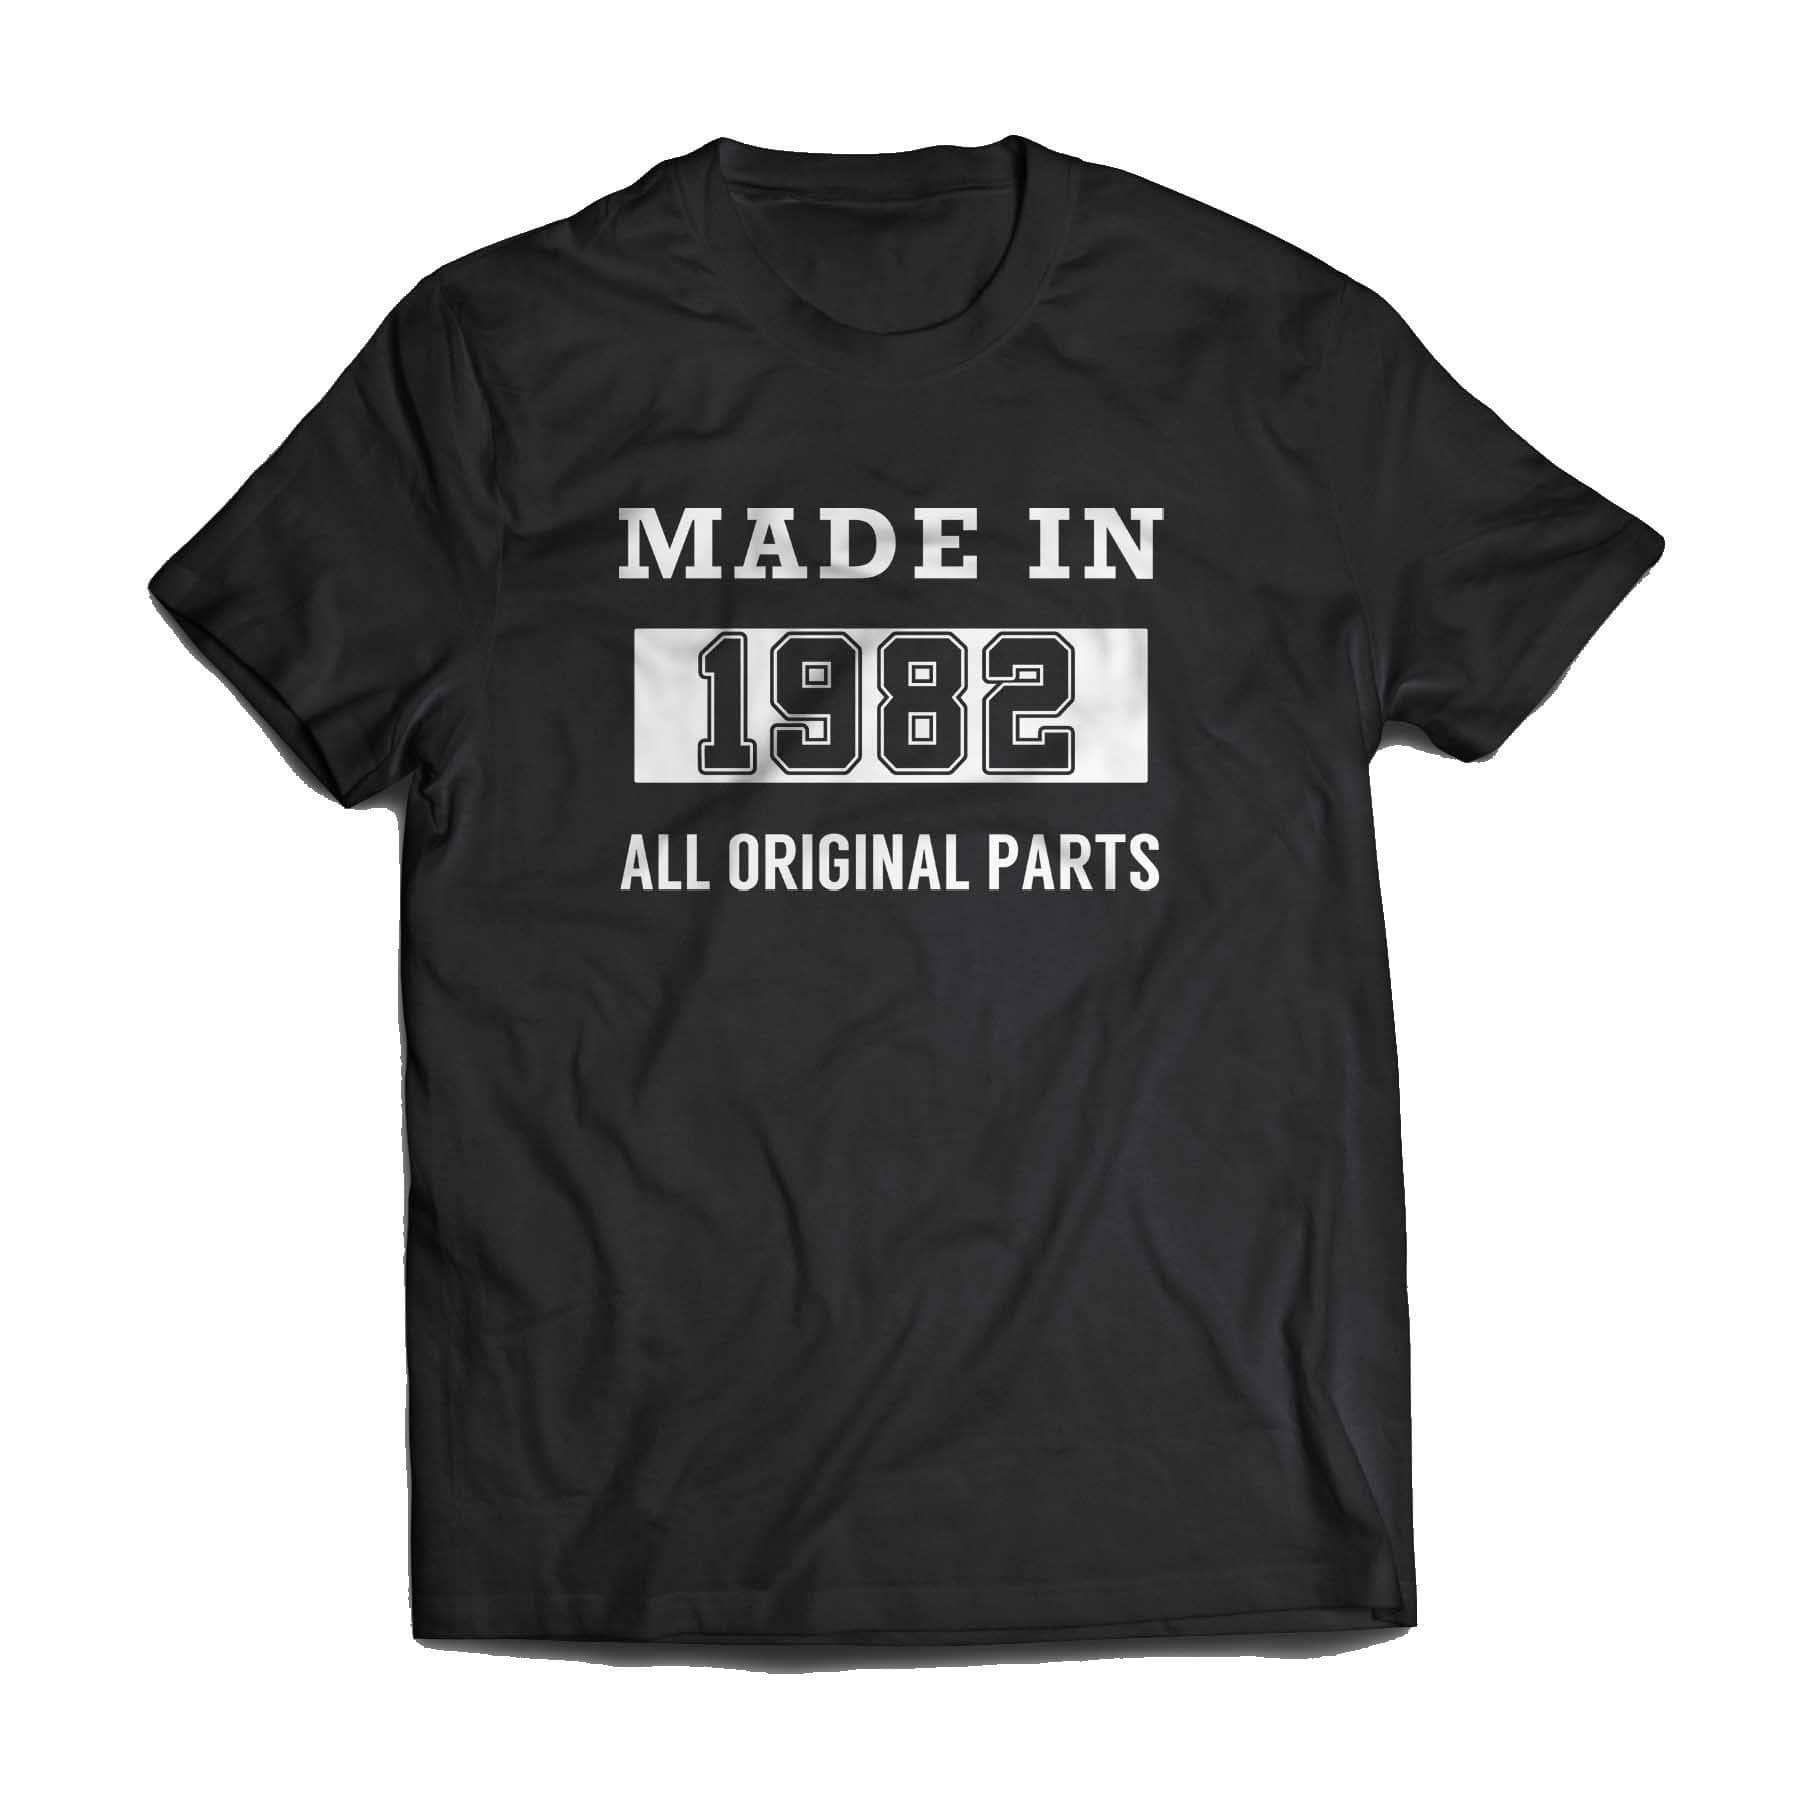 Made In 1982